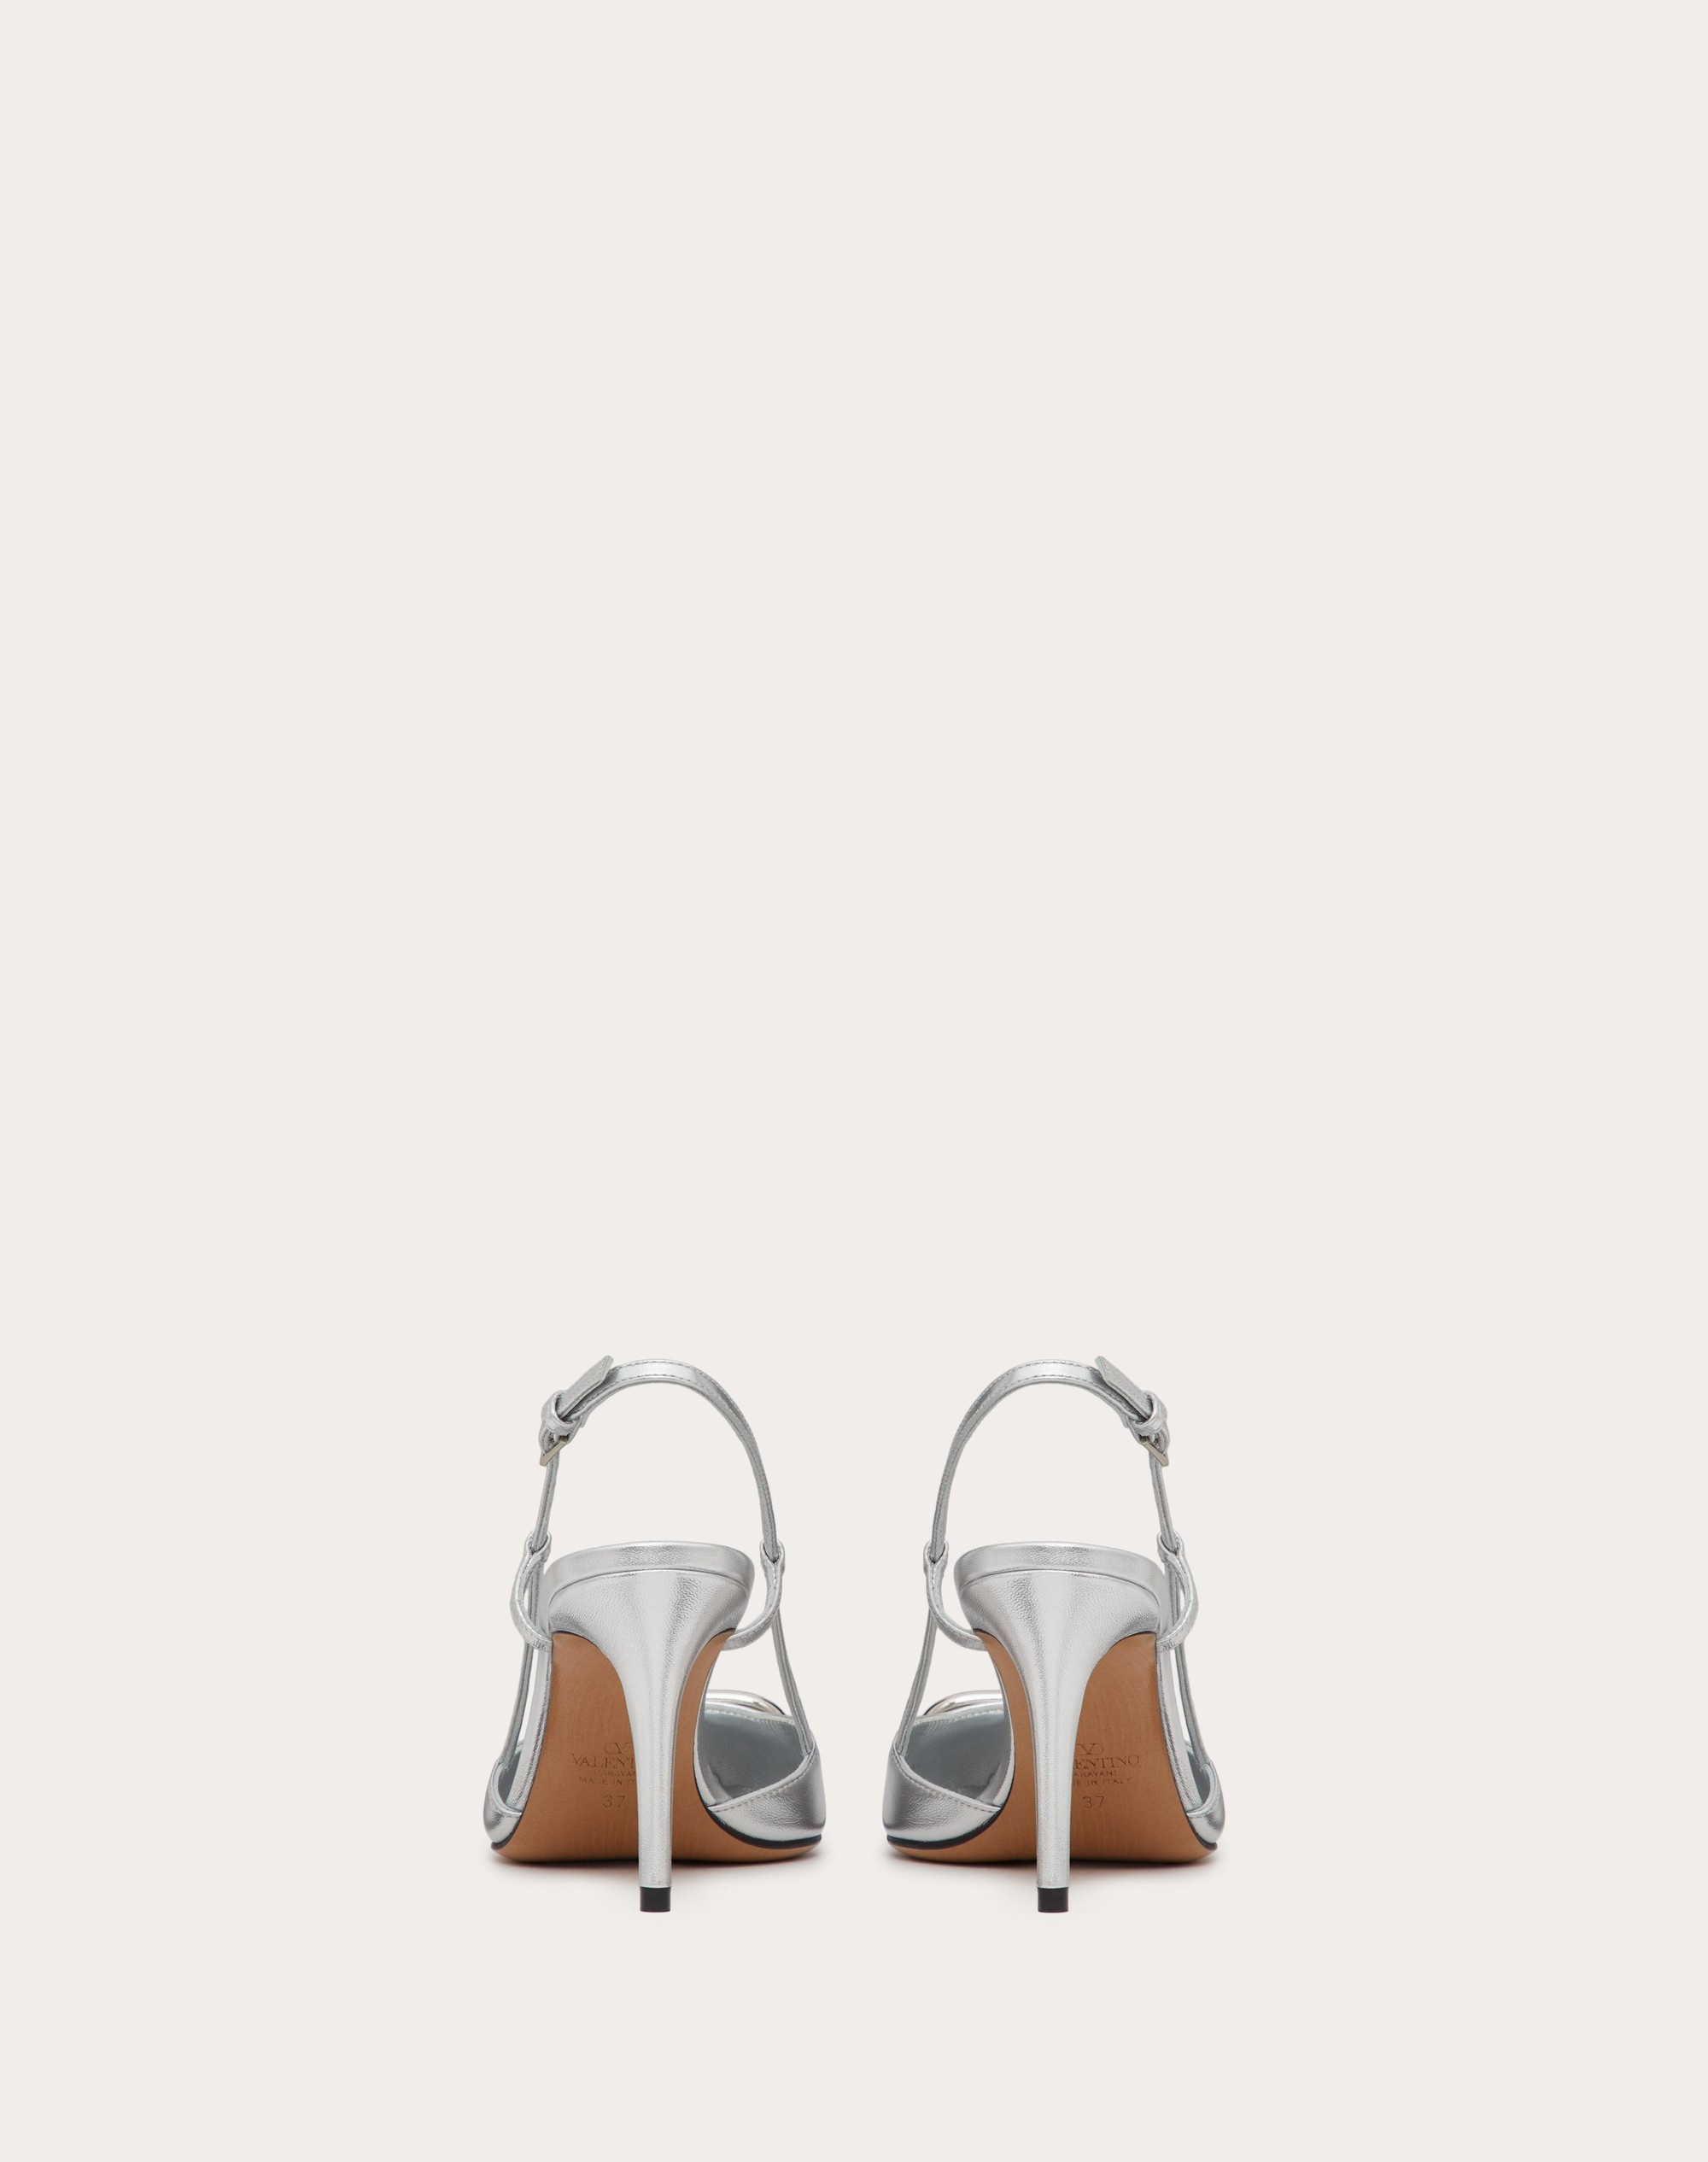 VLOGO SIGNATURE SLINGBACK PUMP IN LAMINATED NAPPA LEATHER 80MM - 3